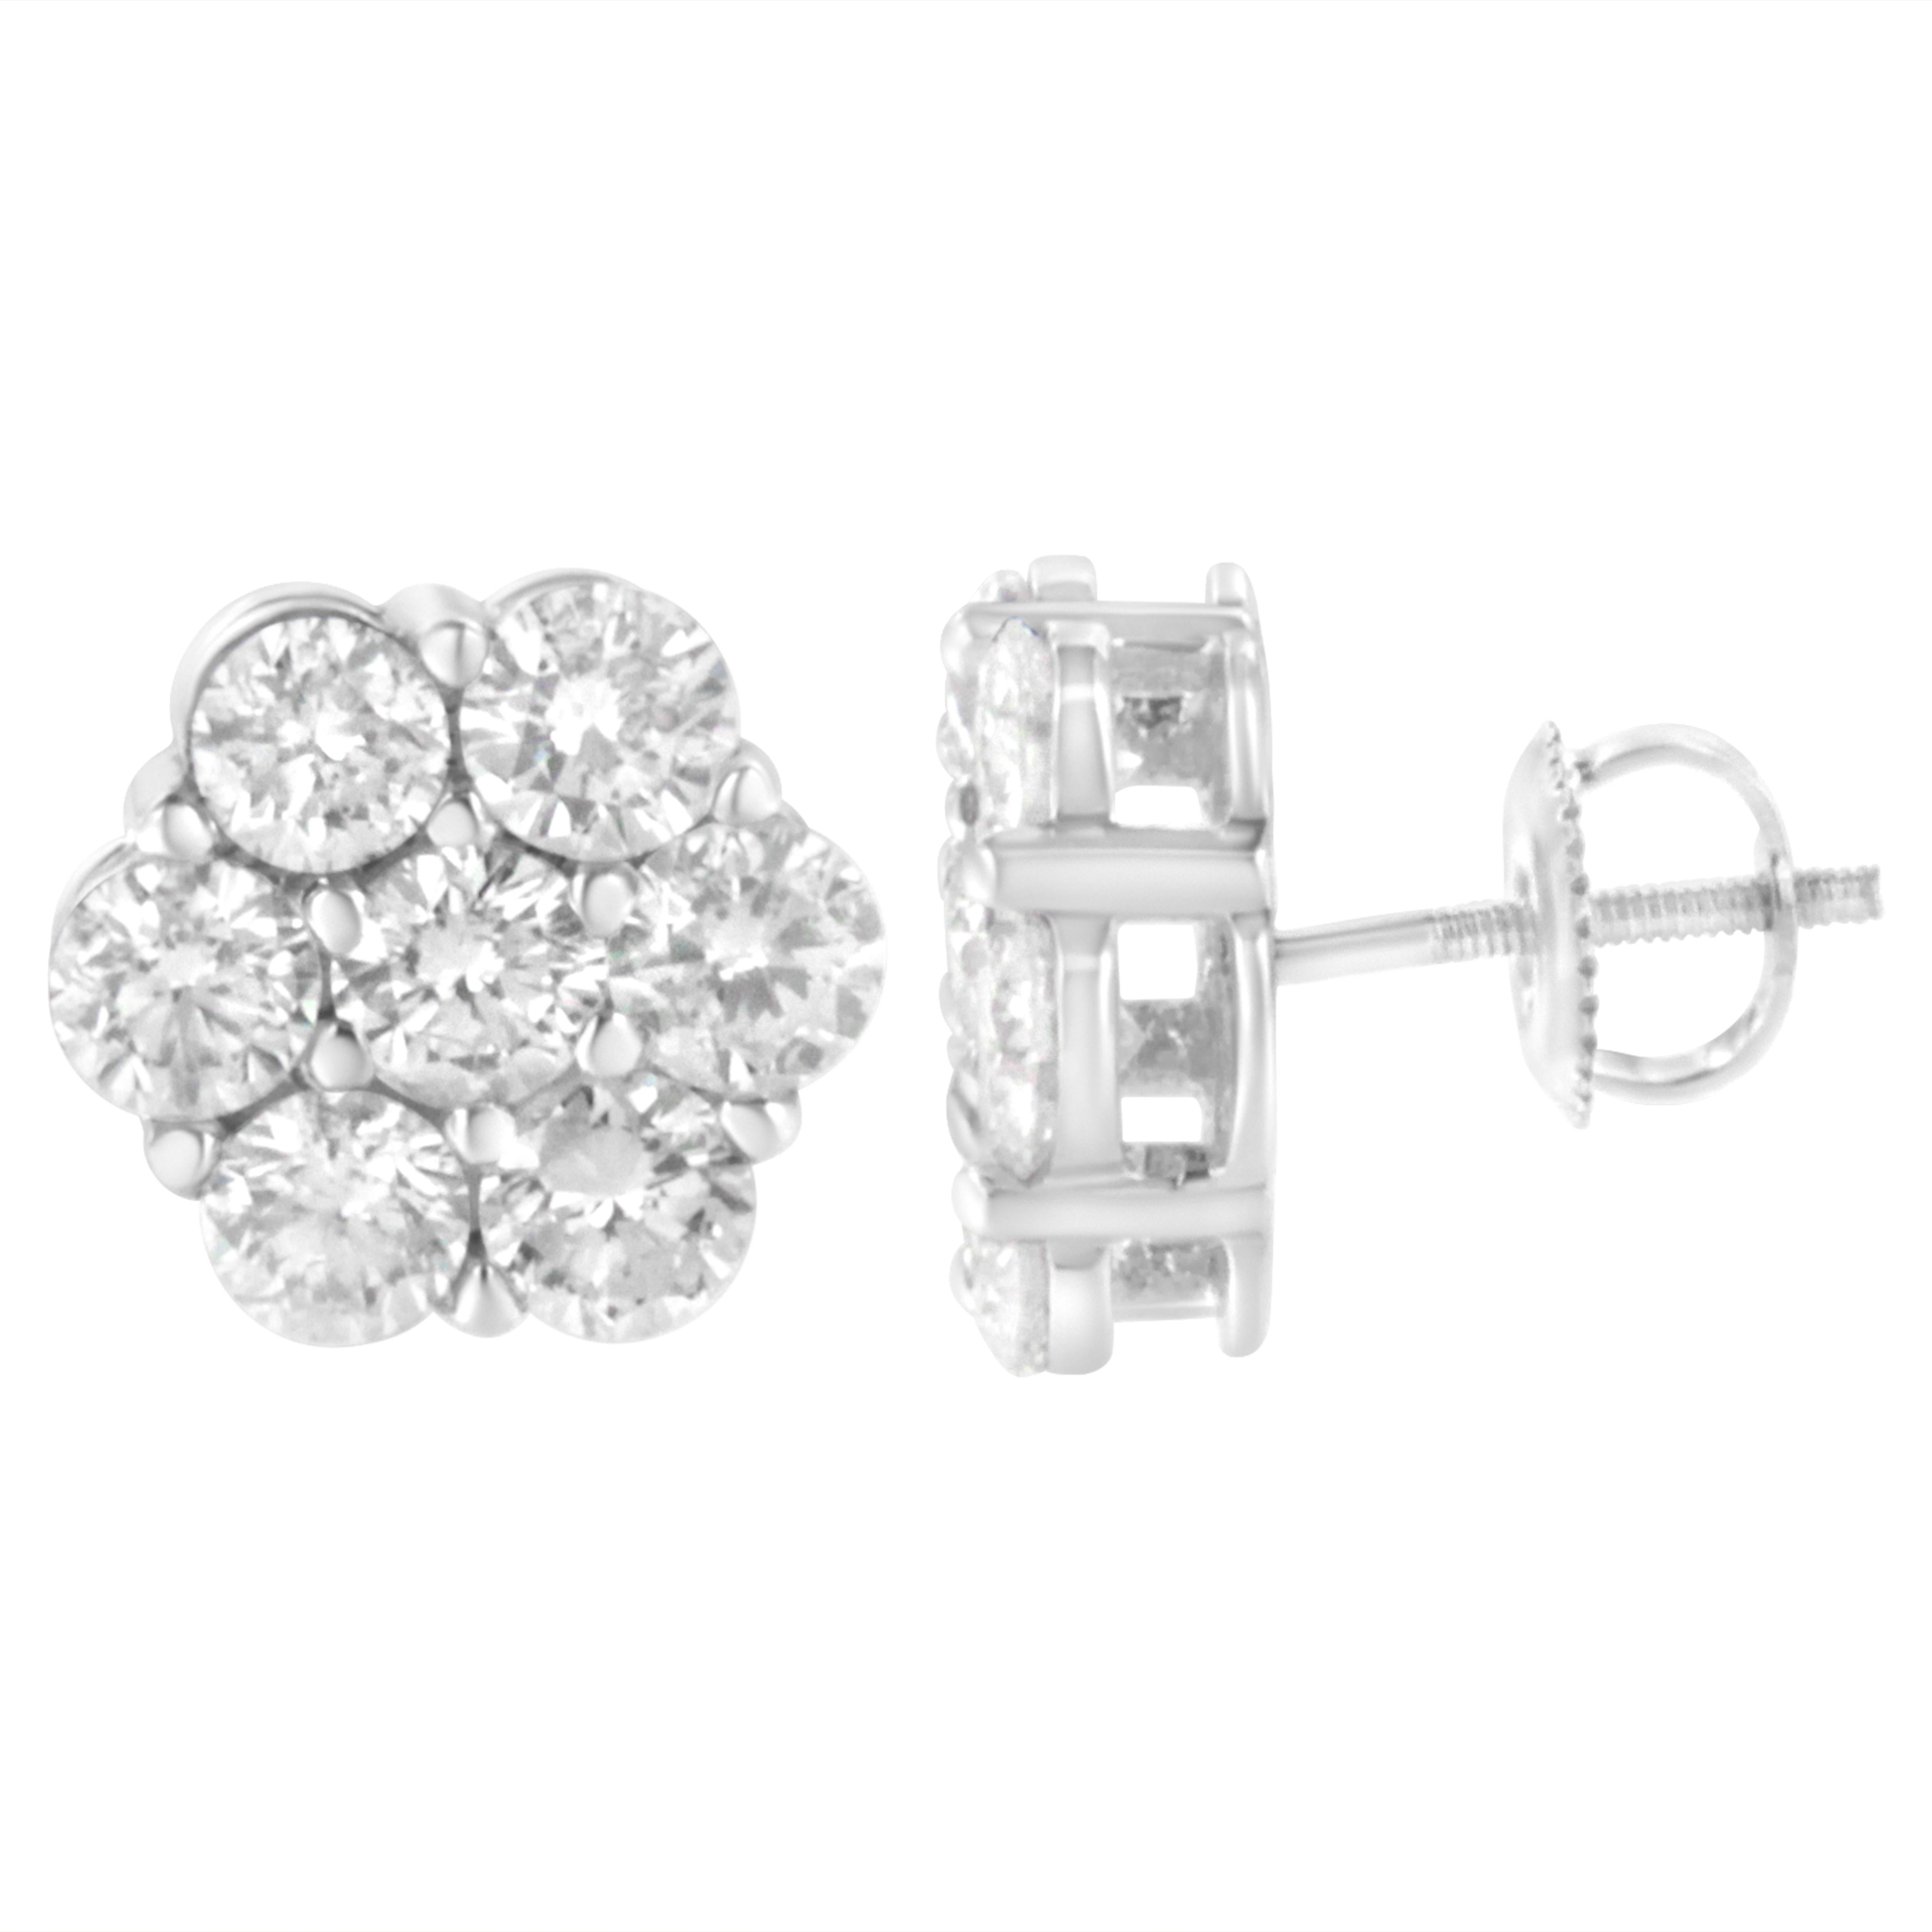 Treat yourself with this fantastic pair of chic and versatile 4 ct tdw floral stud earrings. It features 14 round shaped diamonds encased in 14k white gold with superb detailing's. The classic prong setting secures the diamonds and lends the